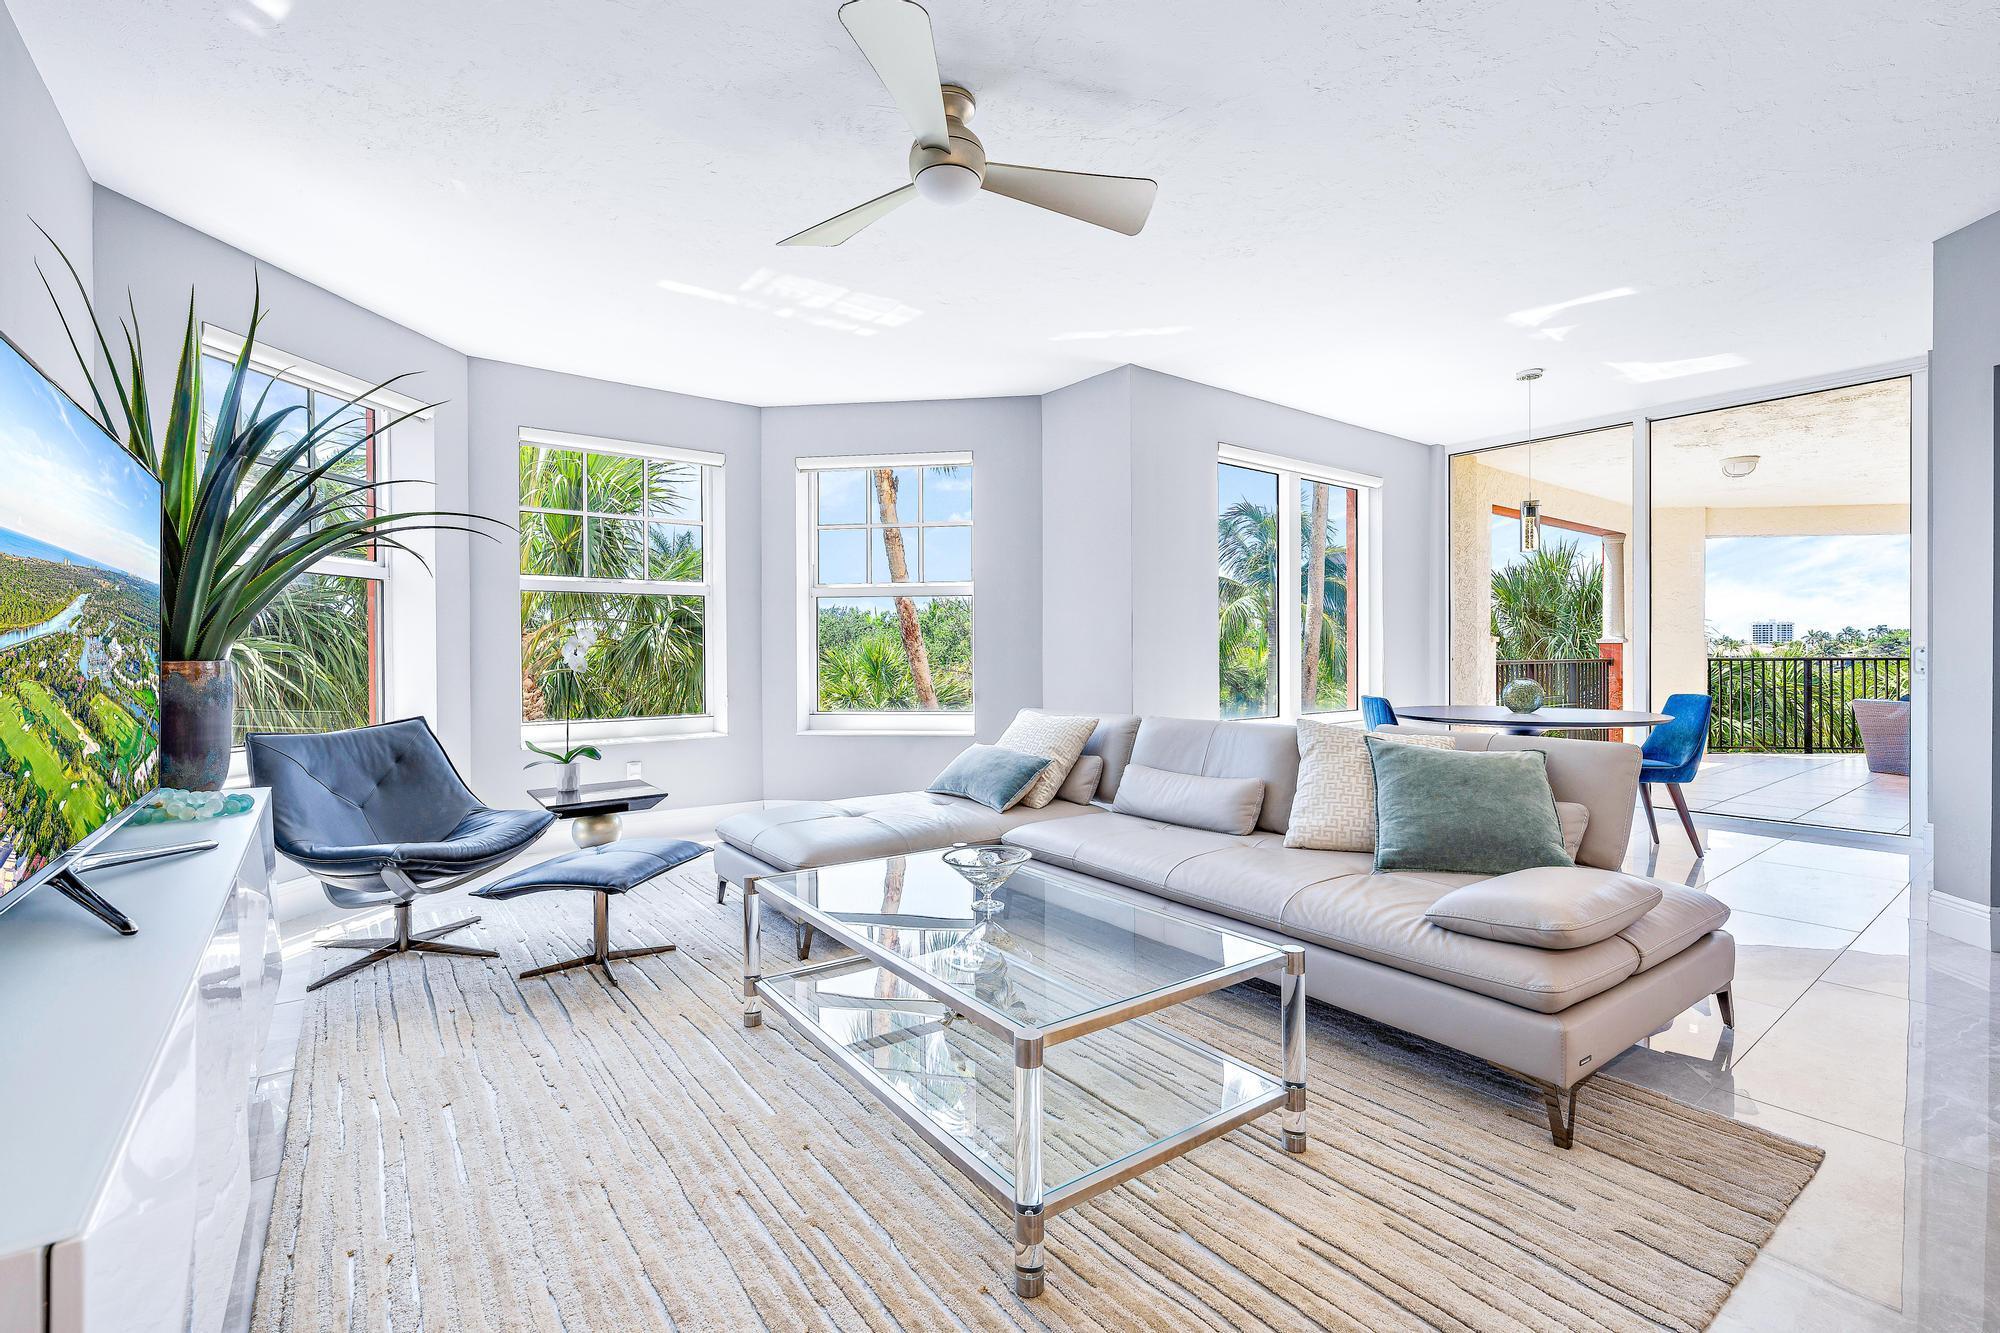 Completely remodeled in 2021, this corner unit at the prestigious Jupiter Yacht Club embodies the essence of luxury living on the Intracoastal in Jupiter. The extensive remodel included all new bathrooms, a fresh kitchen, elegant, oversized marble tile flooring, and updated plumbing in the kitchen and laundry room. The  3,000 square-feet of living area, radiate more of a homely ambience than that of a condo. This condo features a bright family room and grand salon with an abundance of windows and floor-to-ceiling sliders. The generous 500-sf- wrap-around main patio offers various spots for relaxation and entertainment, all while providing beautiful Intracoastal views. Residents have access to first class amenities incl. a heated salt-water pool, poolside summer kitchen / BBQ, a gated dog park, a manned front gate and one under building parking space. Boat slips in the protected JYC Marina can be leased or purchased. Peaceful living while being conveniently close to everything Jupiter has to offer. The Jupiter Yacht Club is home to fine restaurants such as the Dive Bar and Cafe Des Artistes. Located in the heart of Jupiter, minutes away from the miles of beautiful Jupiter beach and within walking distance to Harbourside and the area's finest restaurants, shopping, entertainment and golf courses!